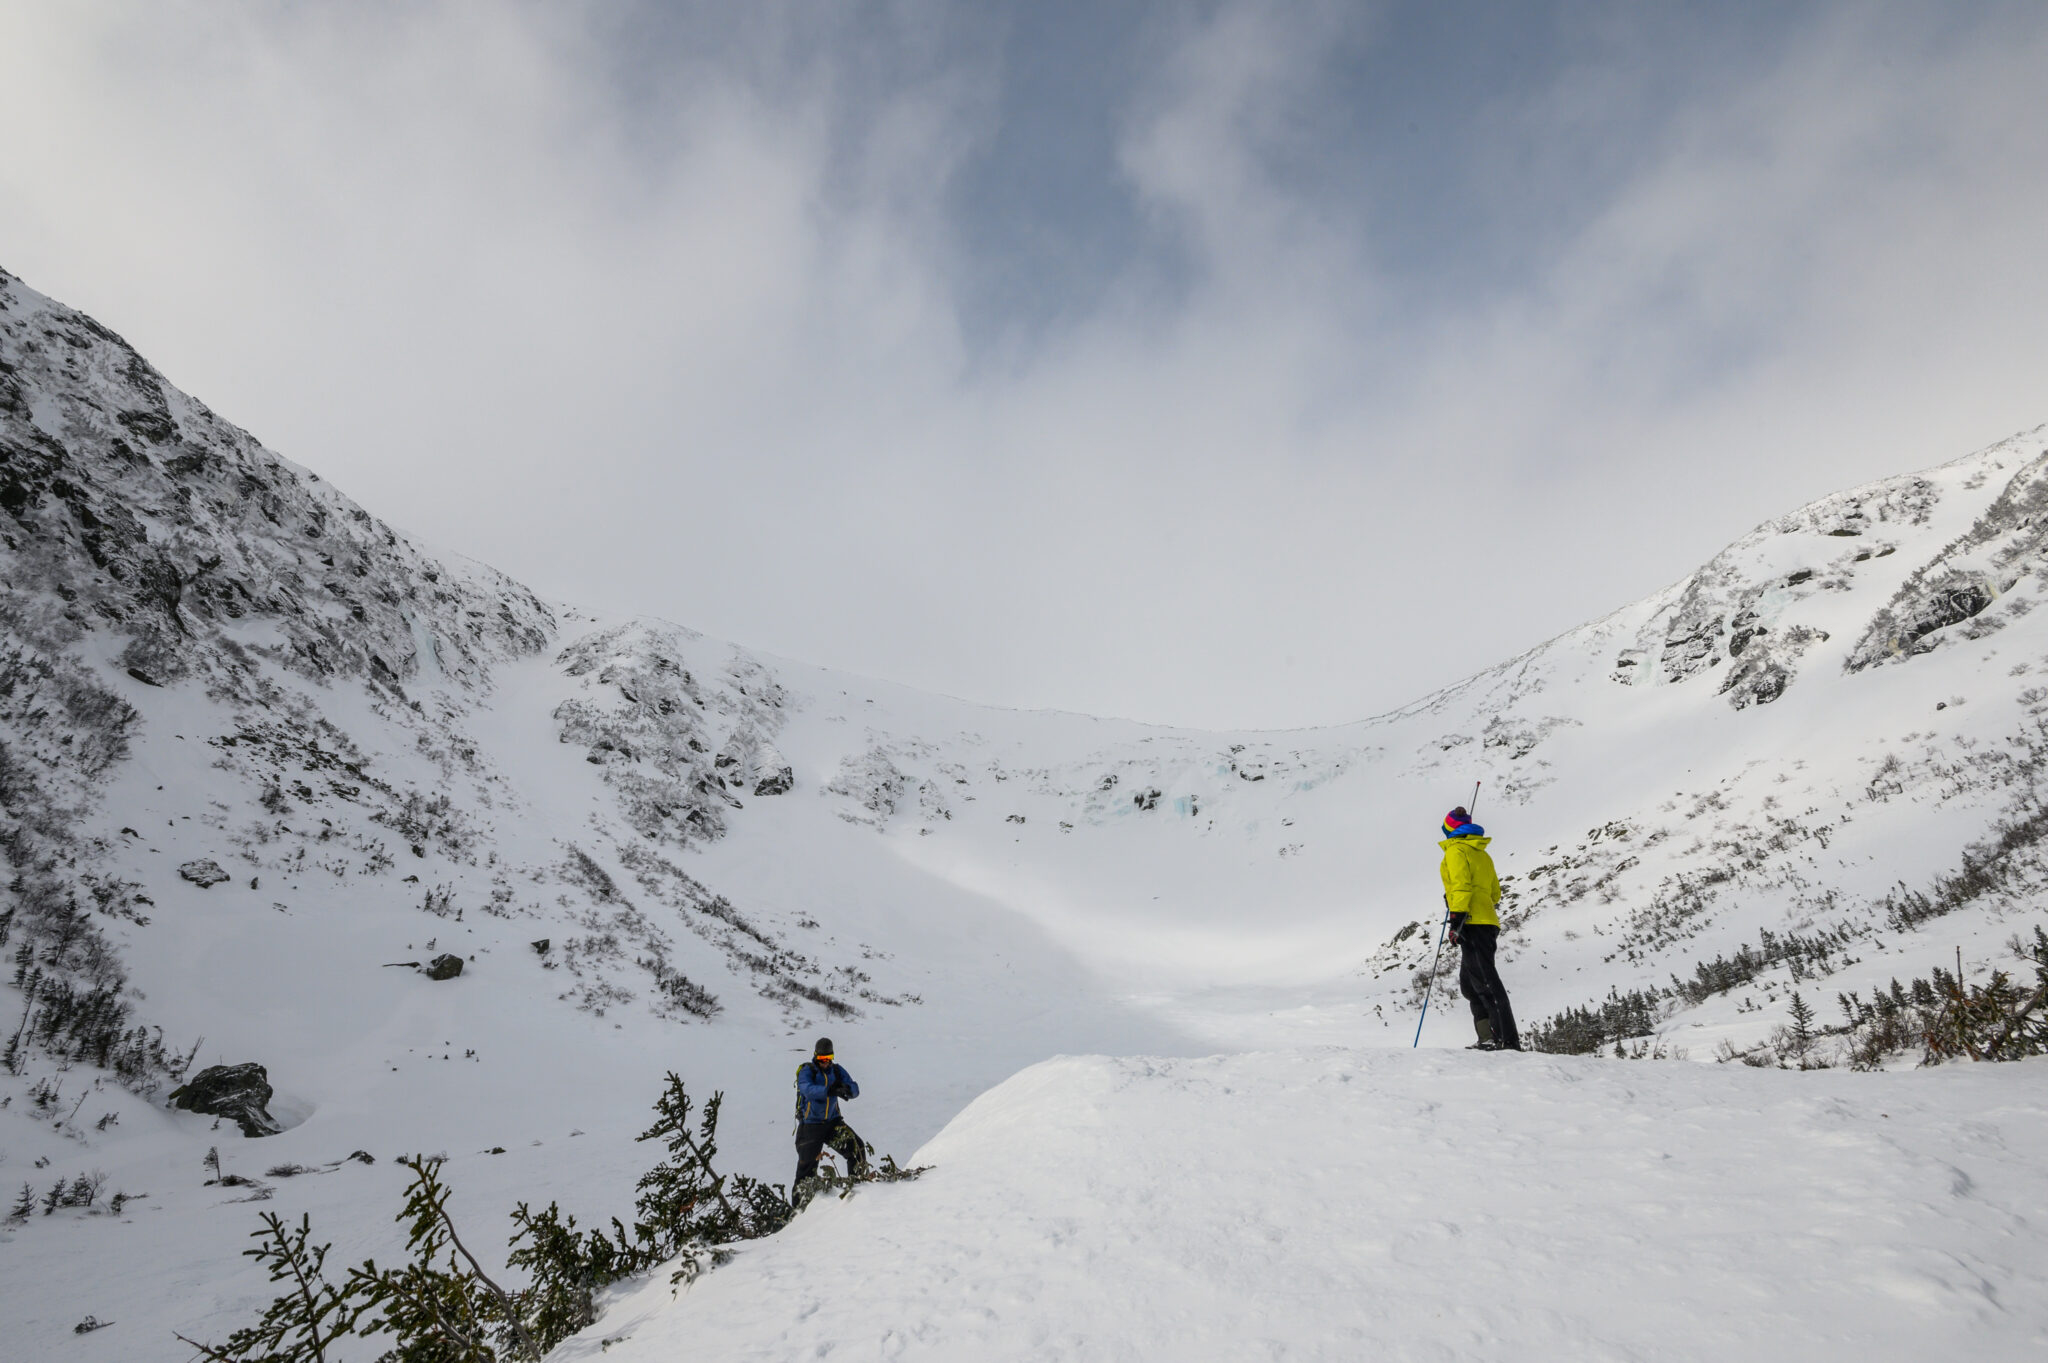 Joe KlementovichTuckerman Ravine is one of the most popular backcountry skiing destinations in New England. Snow data from the area helps to forecast avalanche risk.